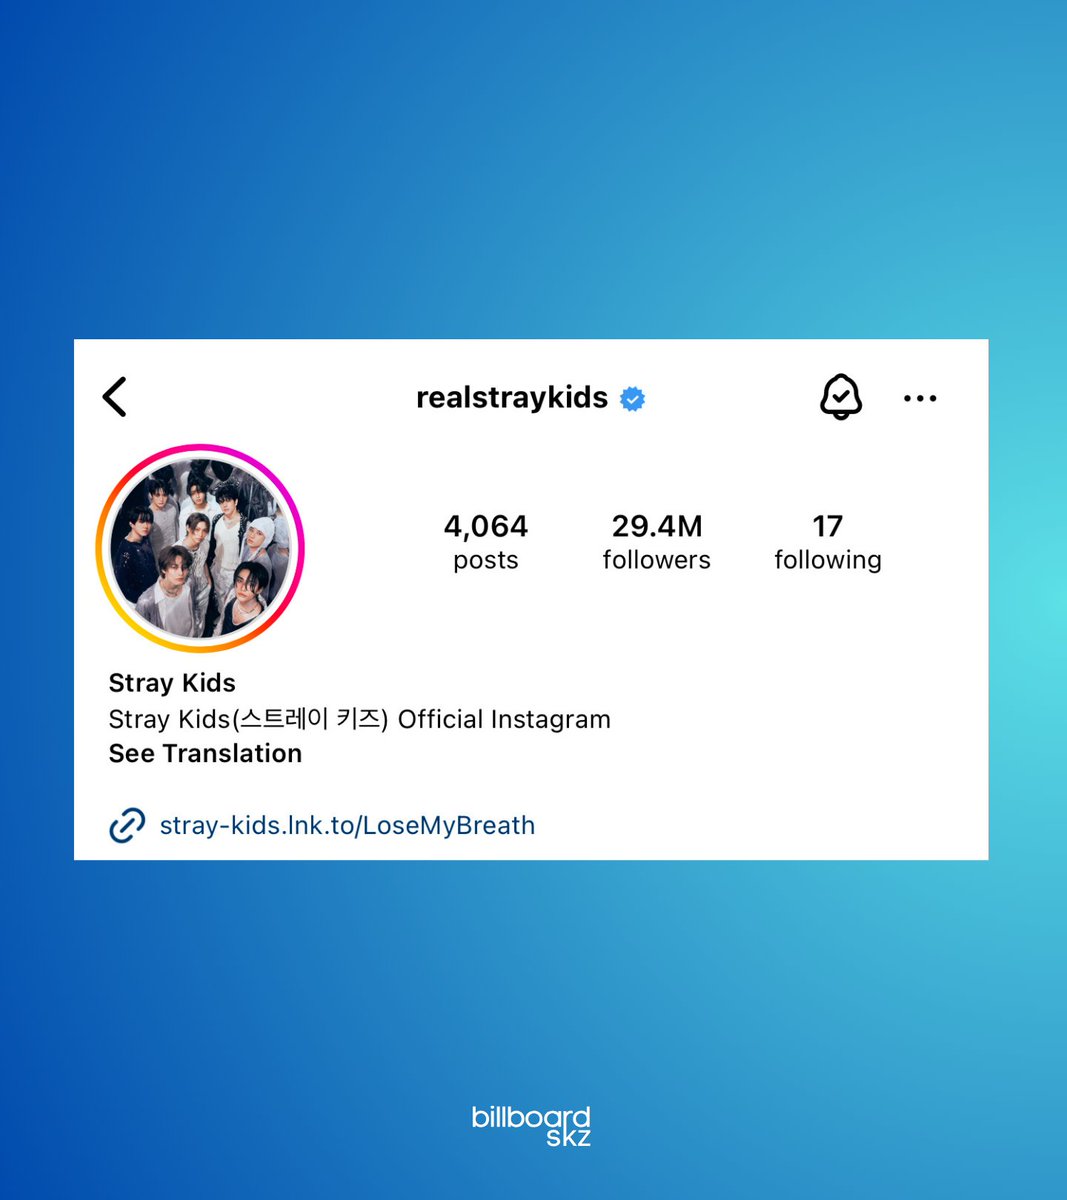 LOOK: @Stray_Kids (realstraykids) updates profile photo on Instagram with #LoseMyBreath concept image.